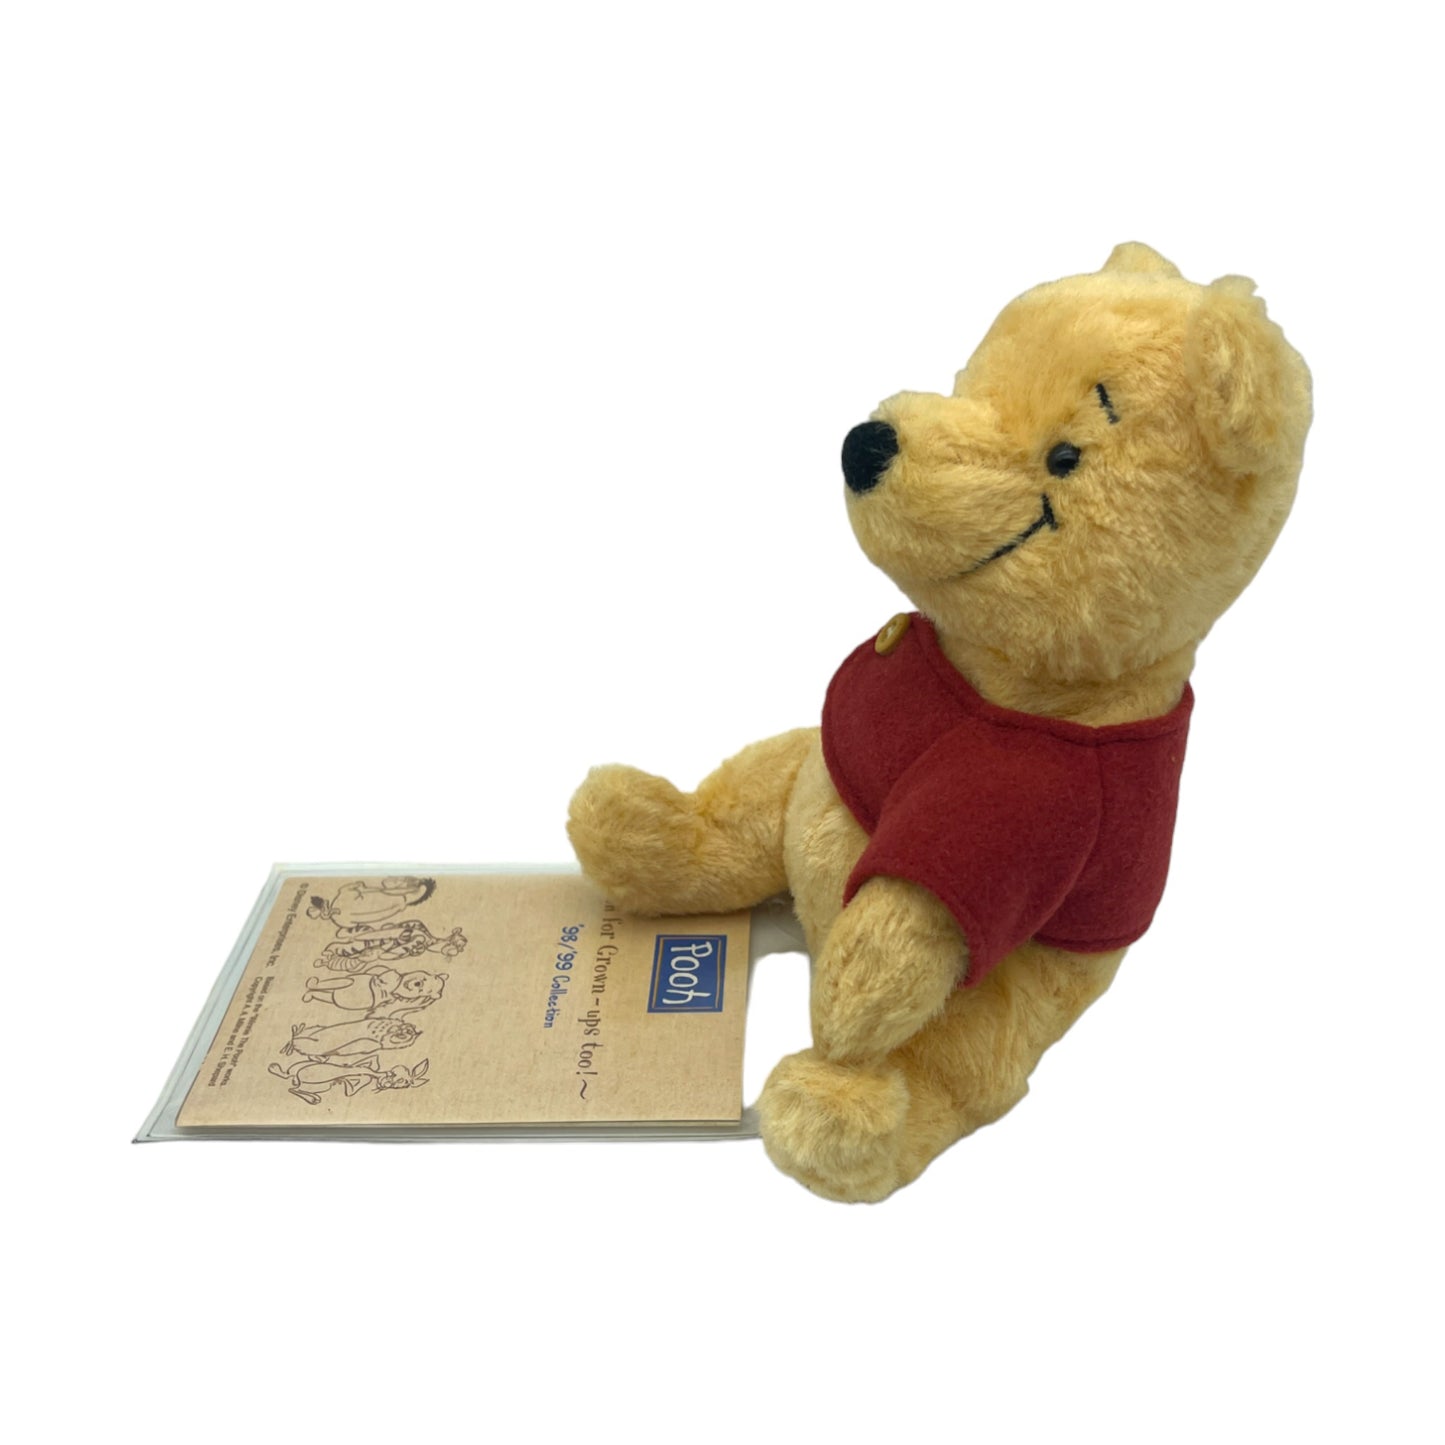 Disney Store Tokyo - Pooh & Friends - 98/99 Collection pooh For Grown Ups Too - Vintage - 7"